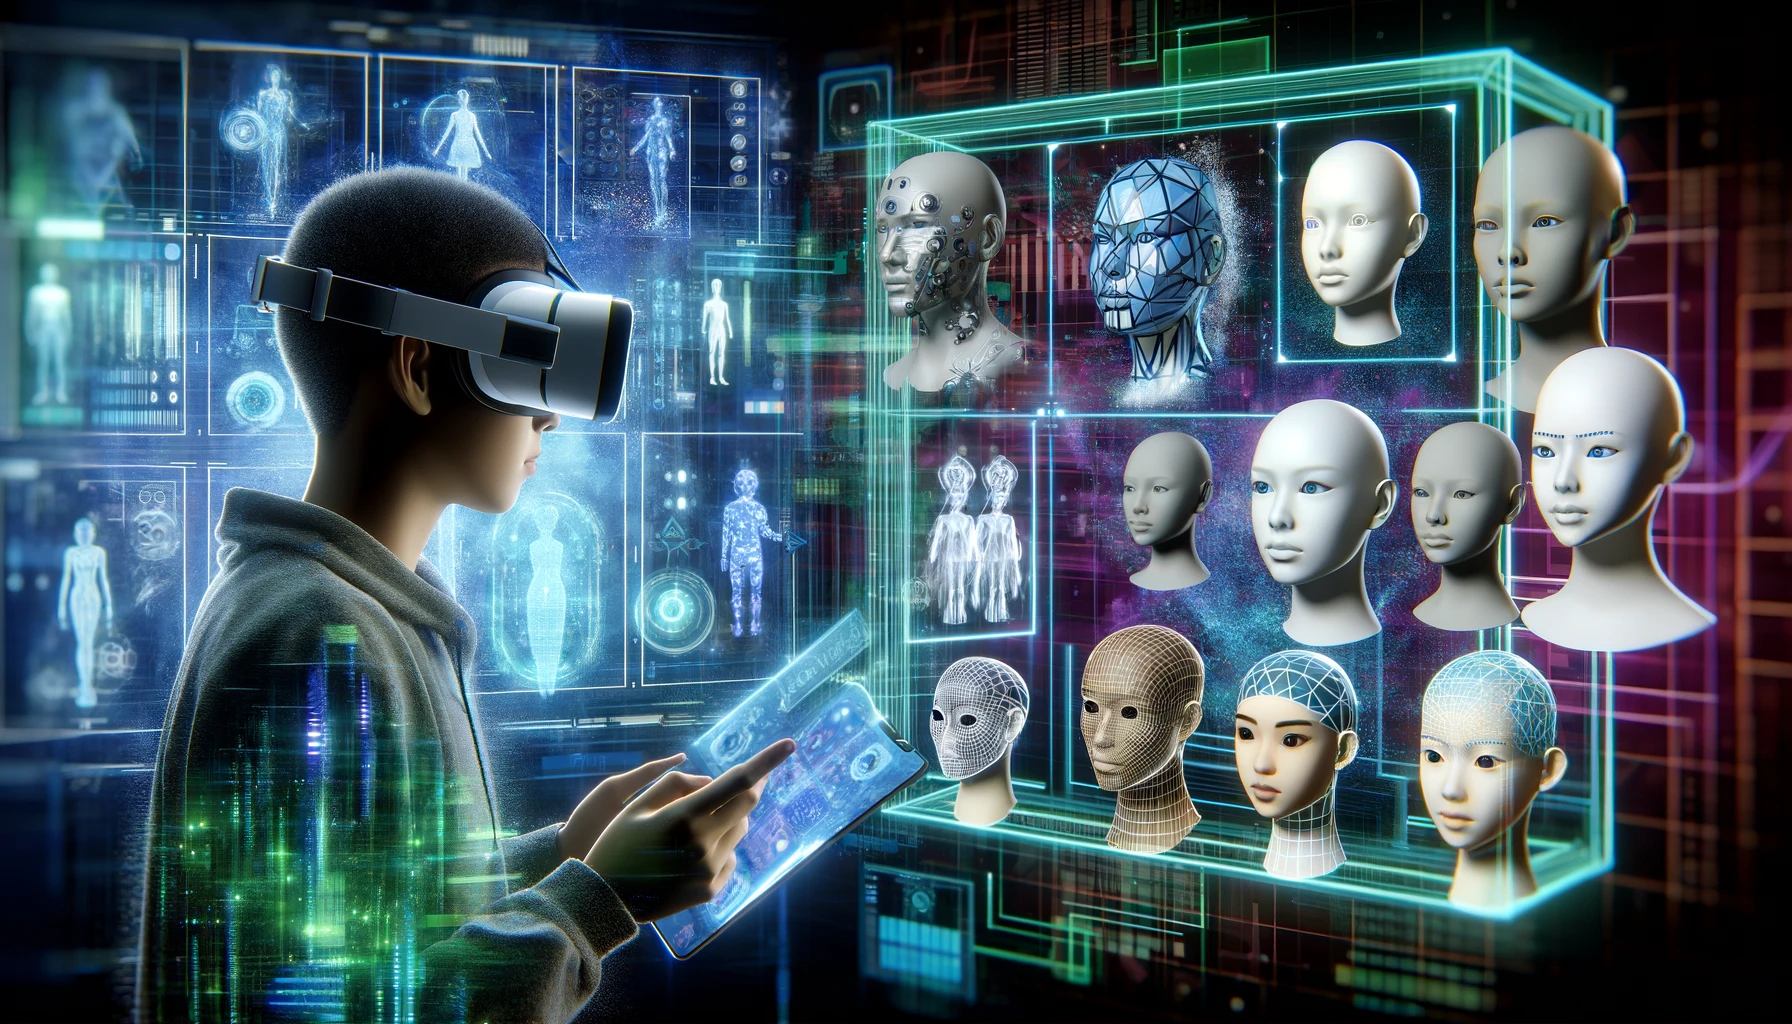 This image illustrates the immersive experience of using VR technology for personalized customization, set in a vibrant and futuristic digital environment.